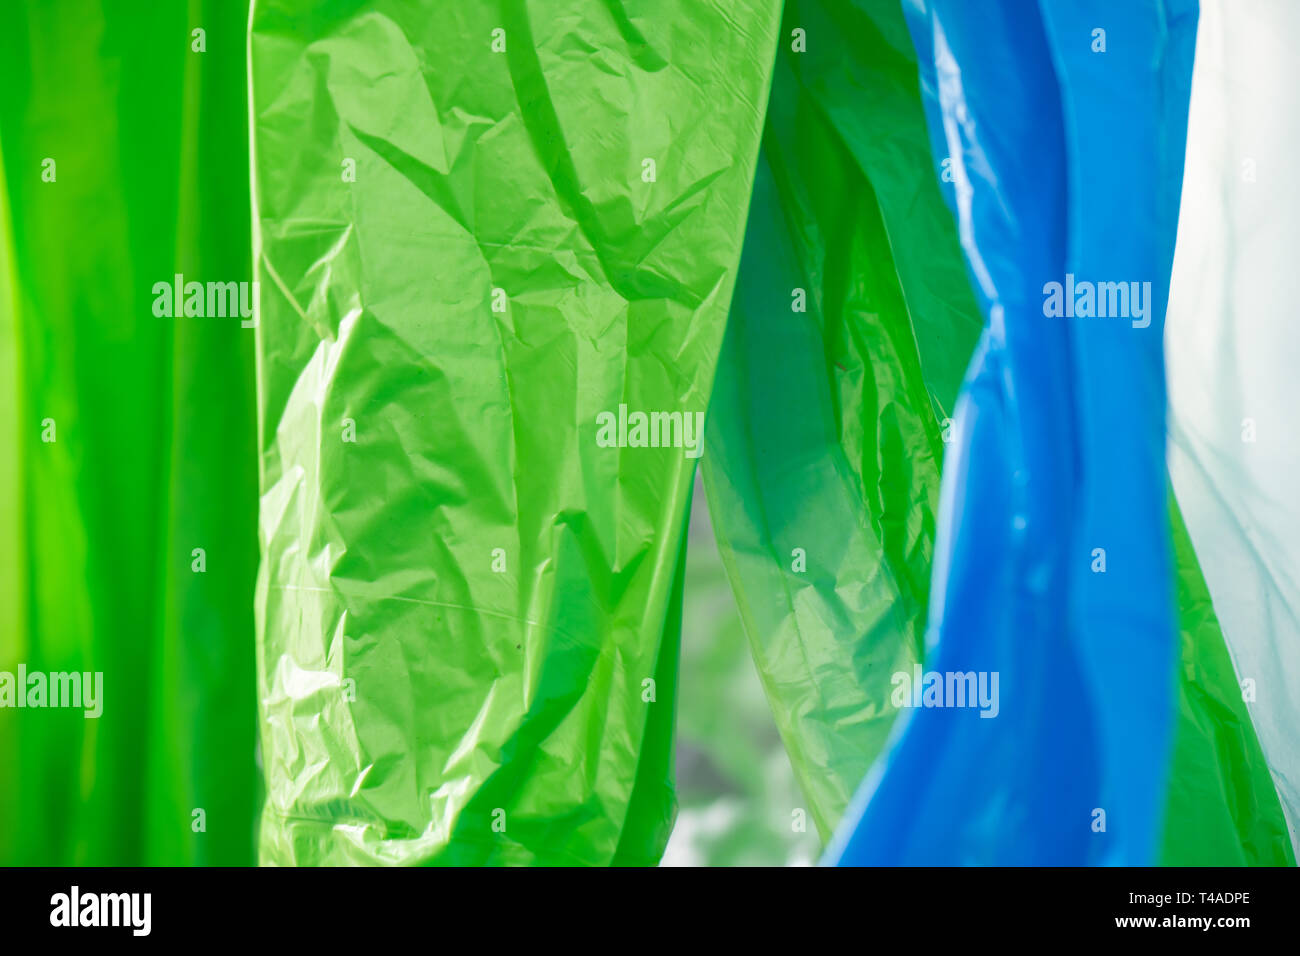 Light green and blue plastic trash bags polluting environment Stock Photo